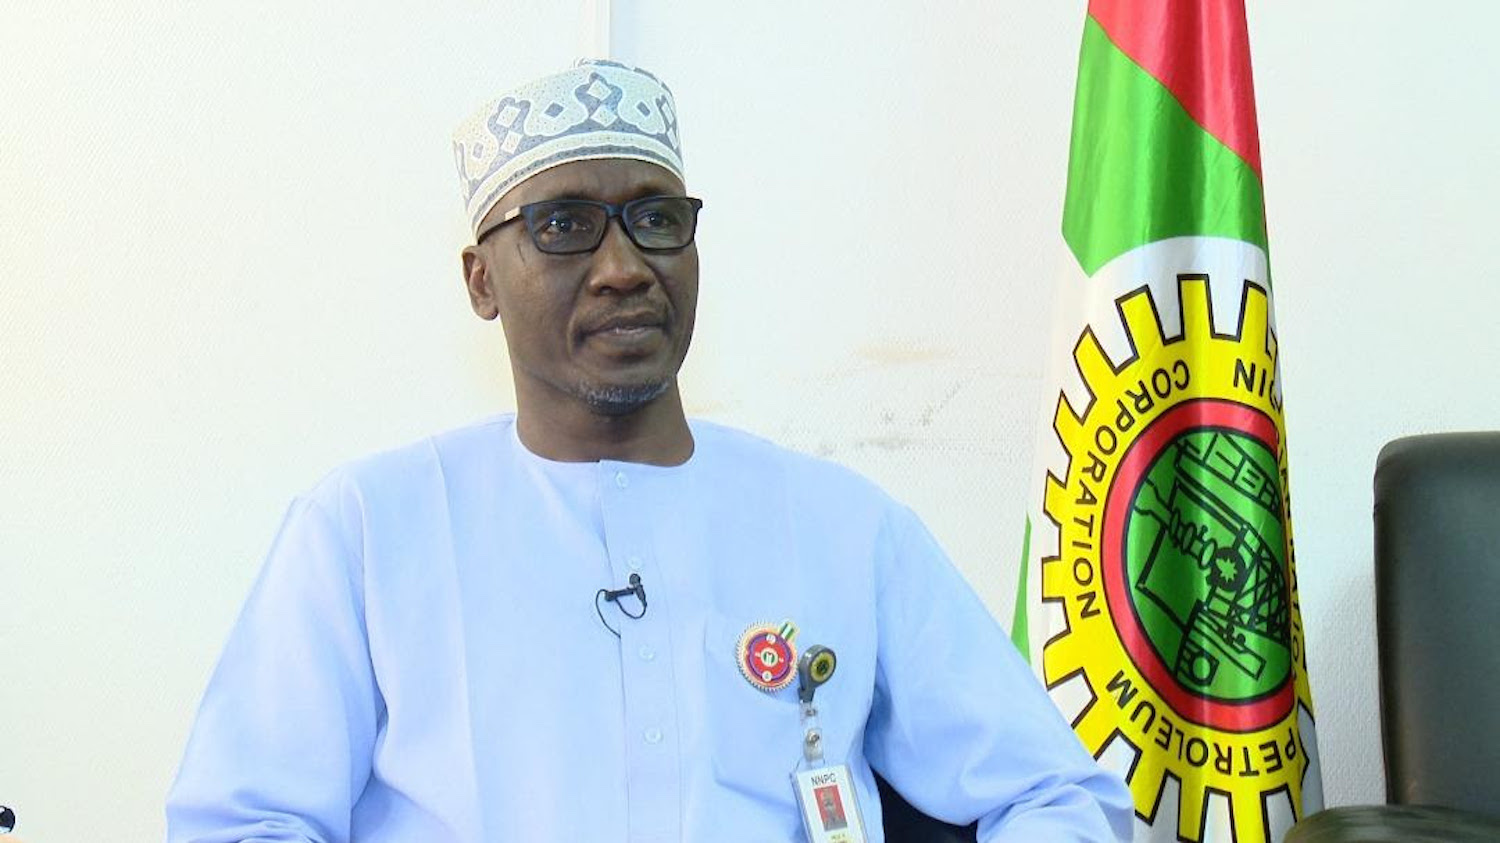 NNPC Board not independent, 80% of members lack oil sector experience — Expert